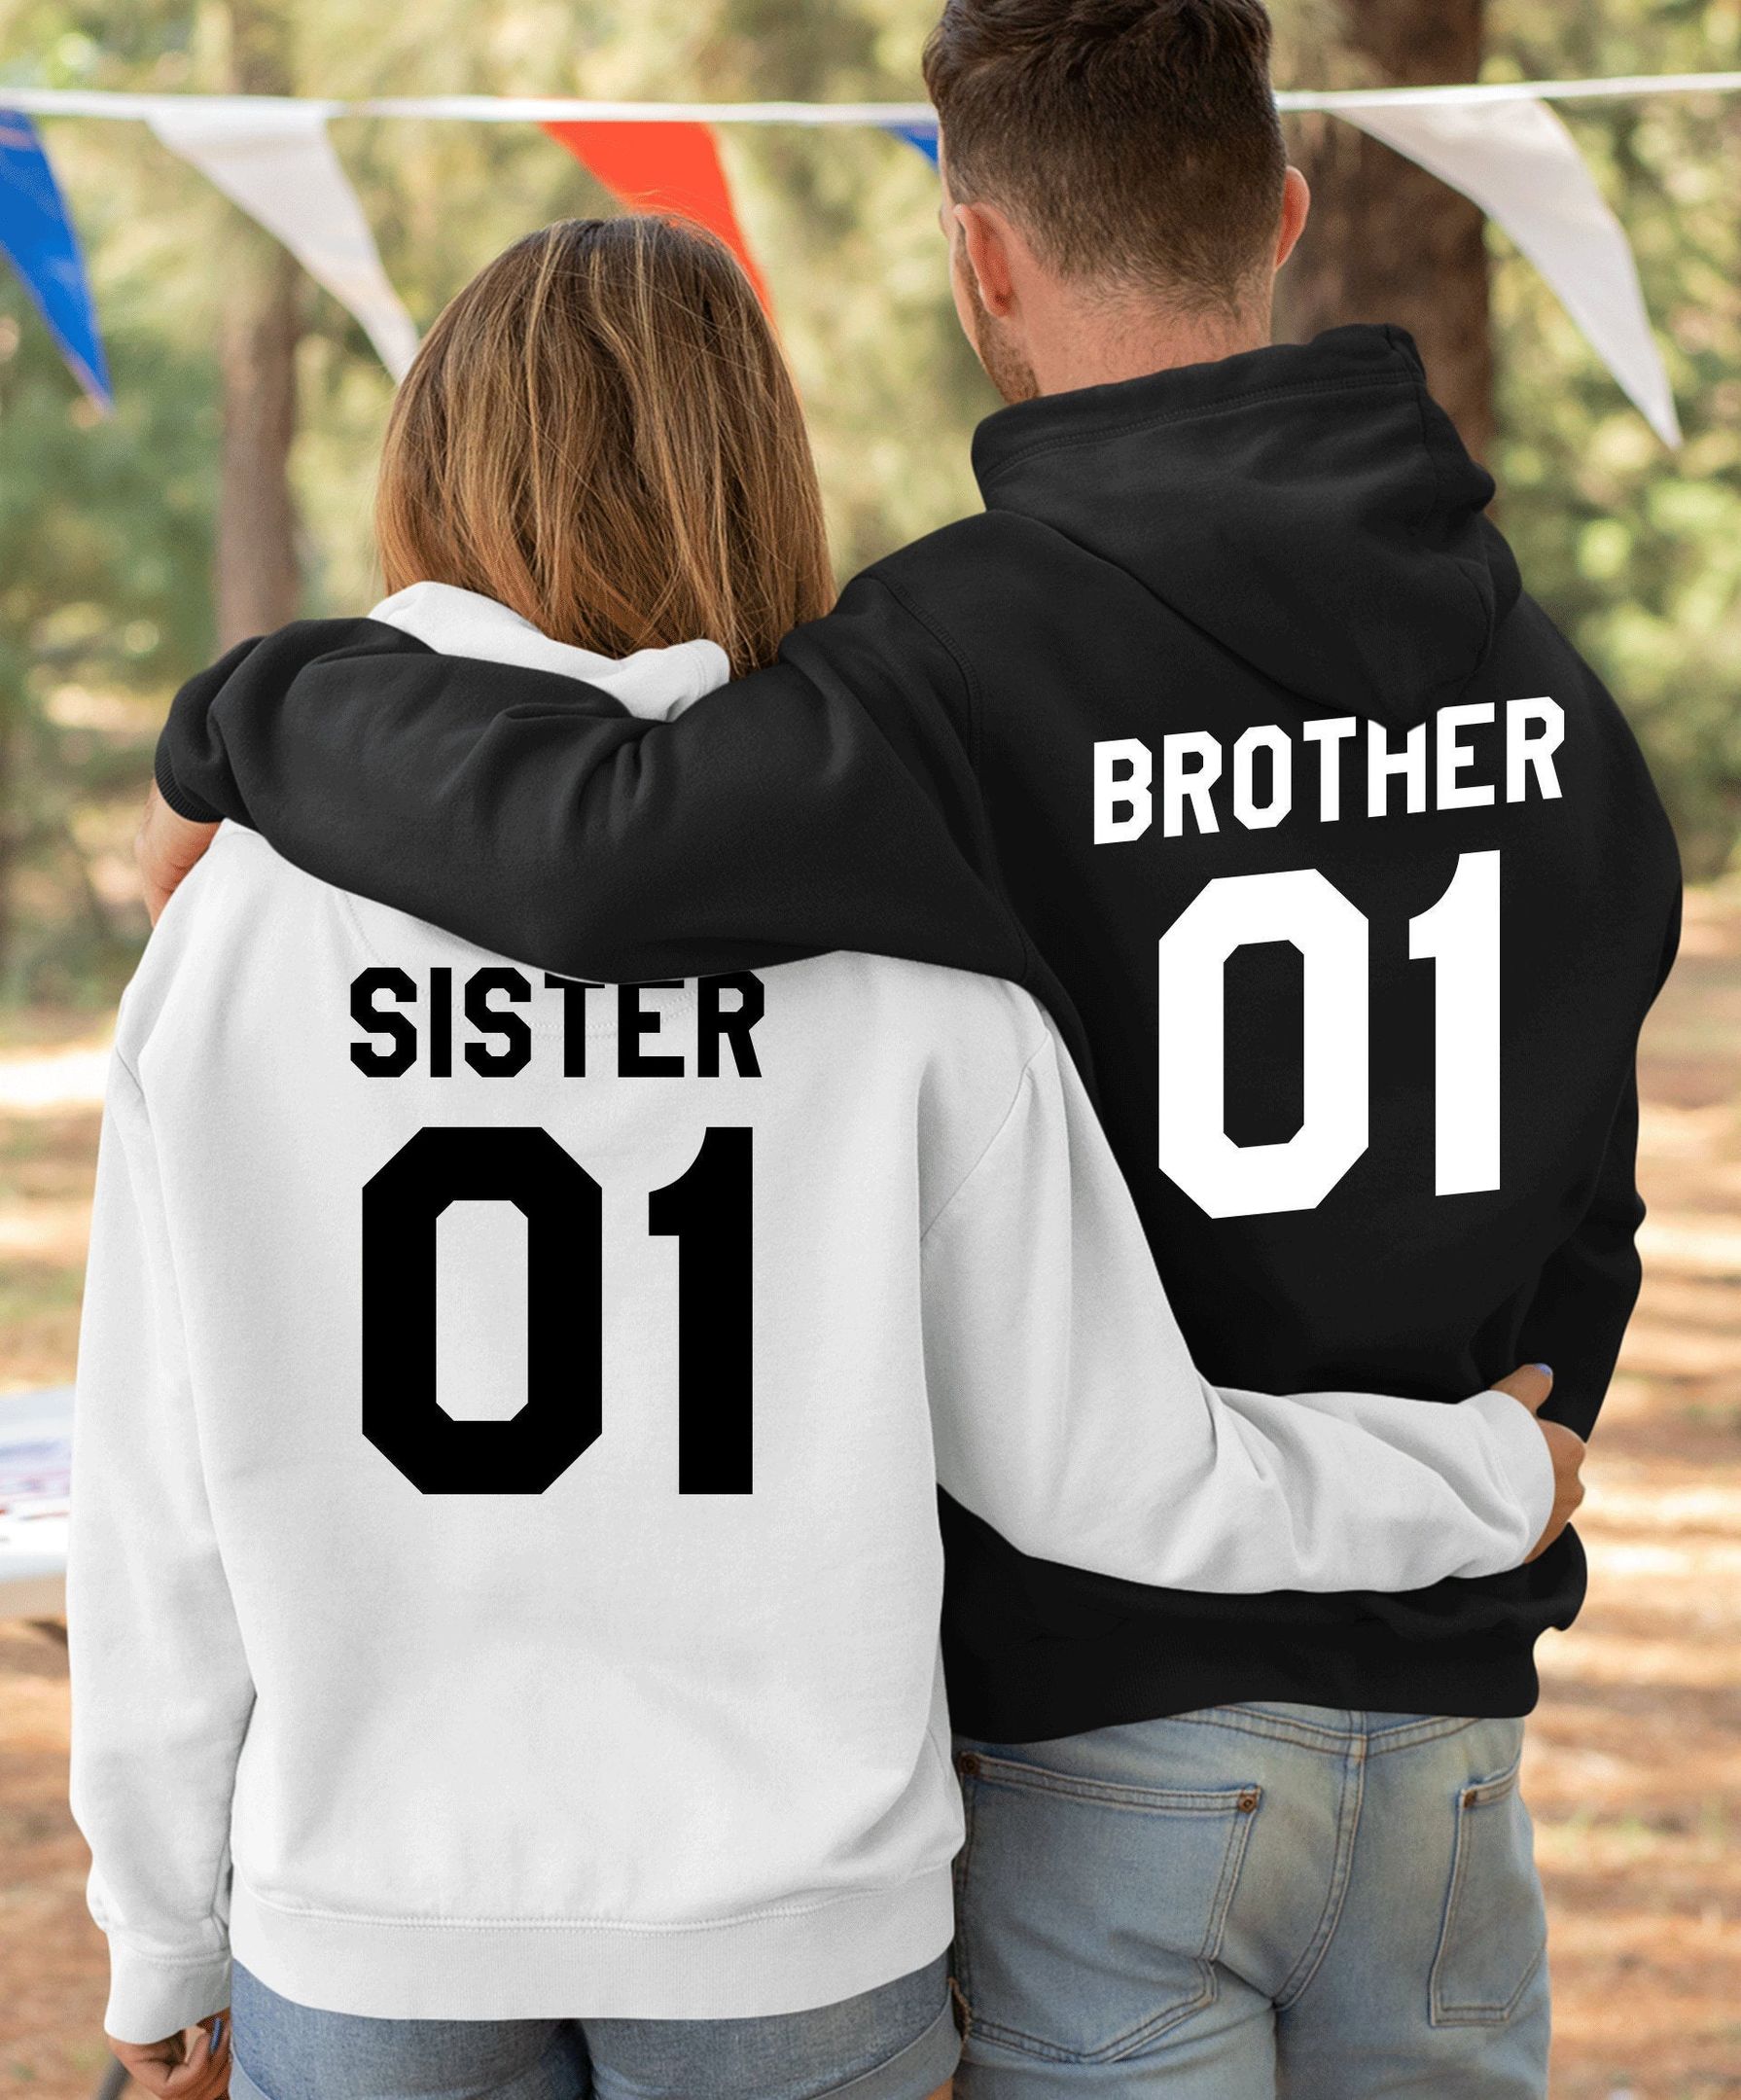 Personalized Sister 01 Sister 02 Matching hoodie custom name number gift for best friend